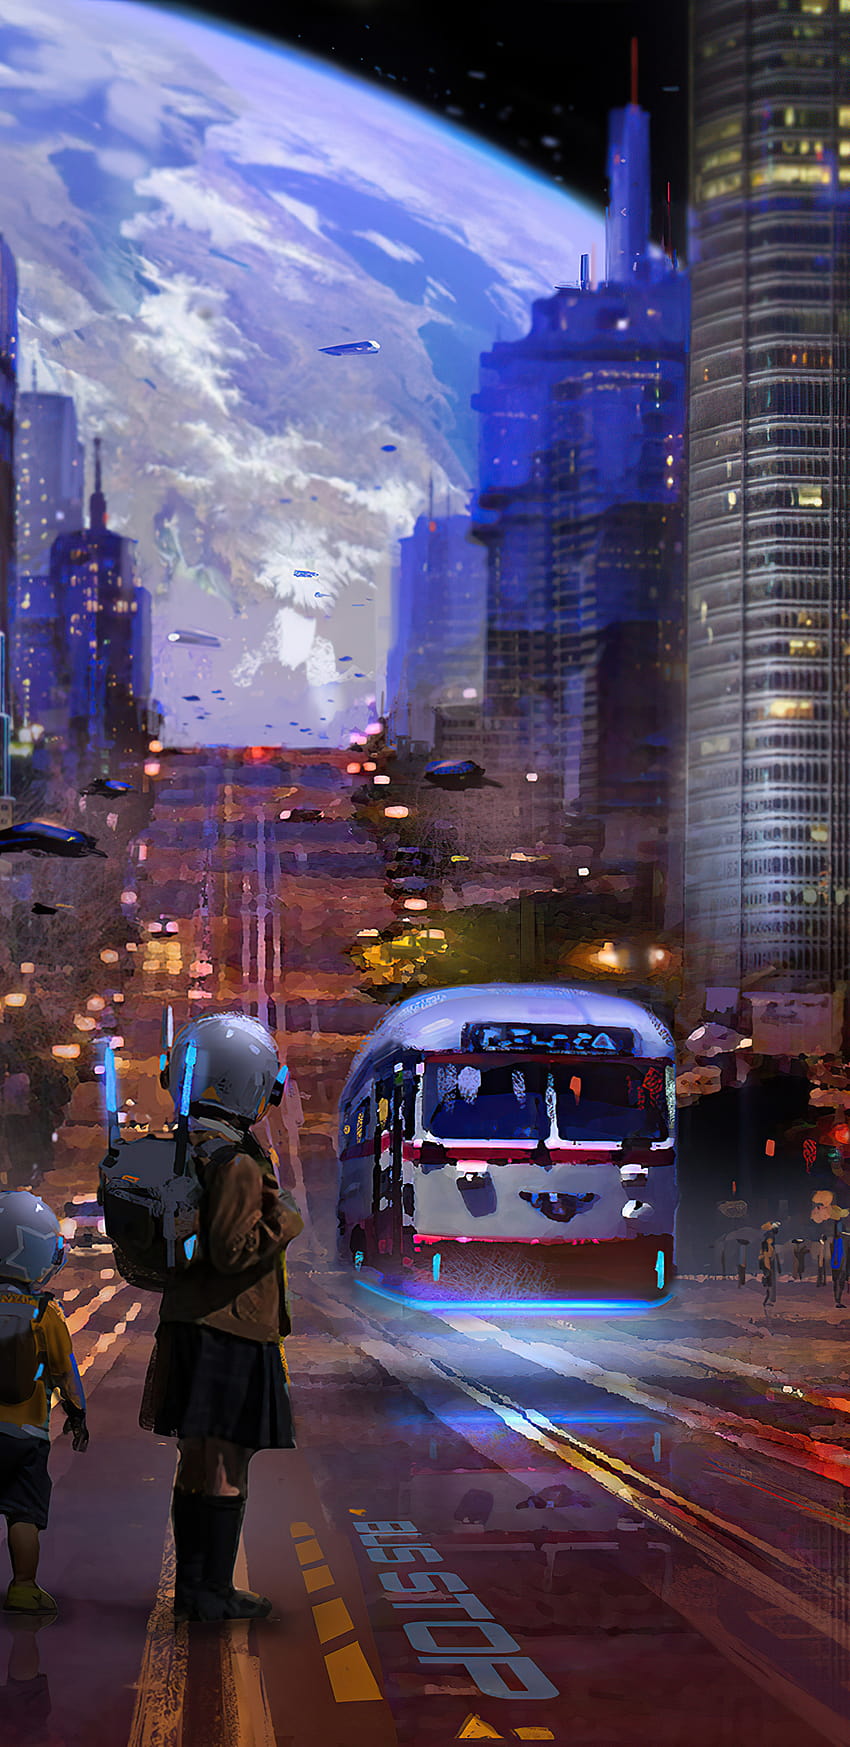 1440x2960 Star City Bus Stop Samsung Galaxy Note 9,8, S9,S8,S Q , Backgrounds, and, bus station HD phone wallpaper